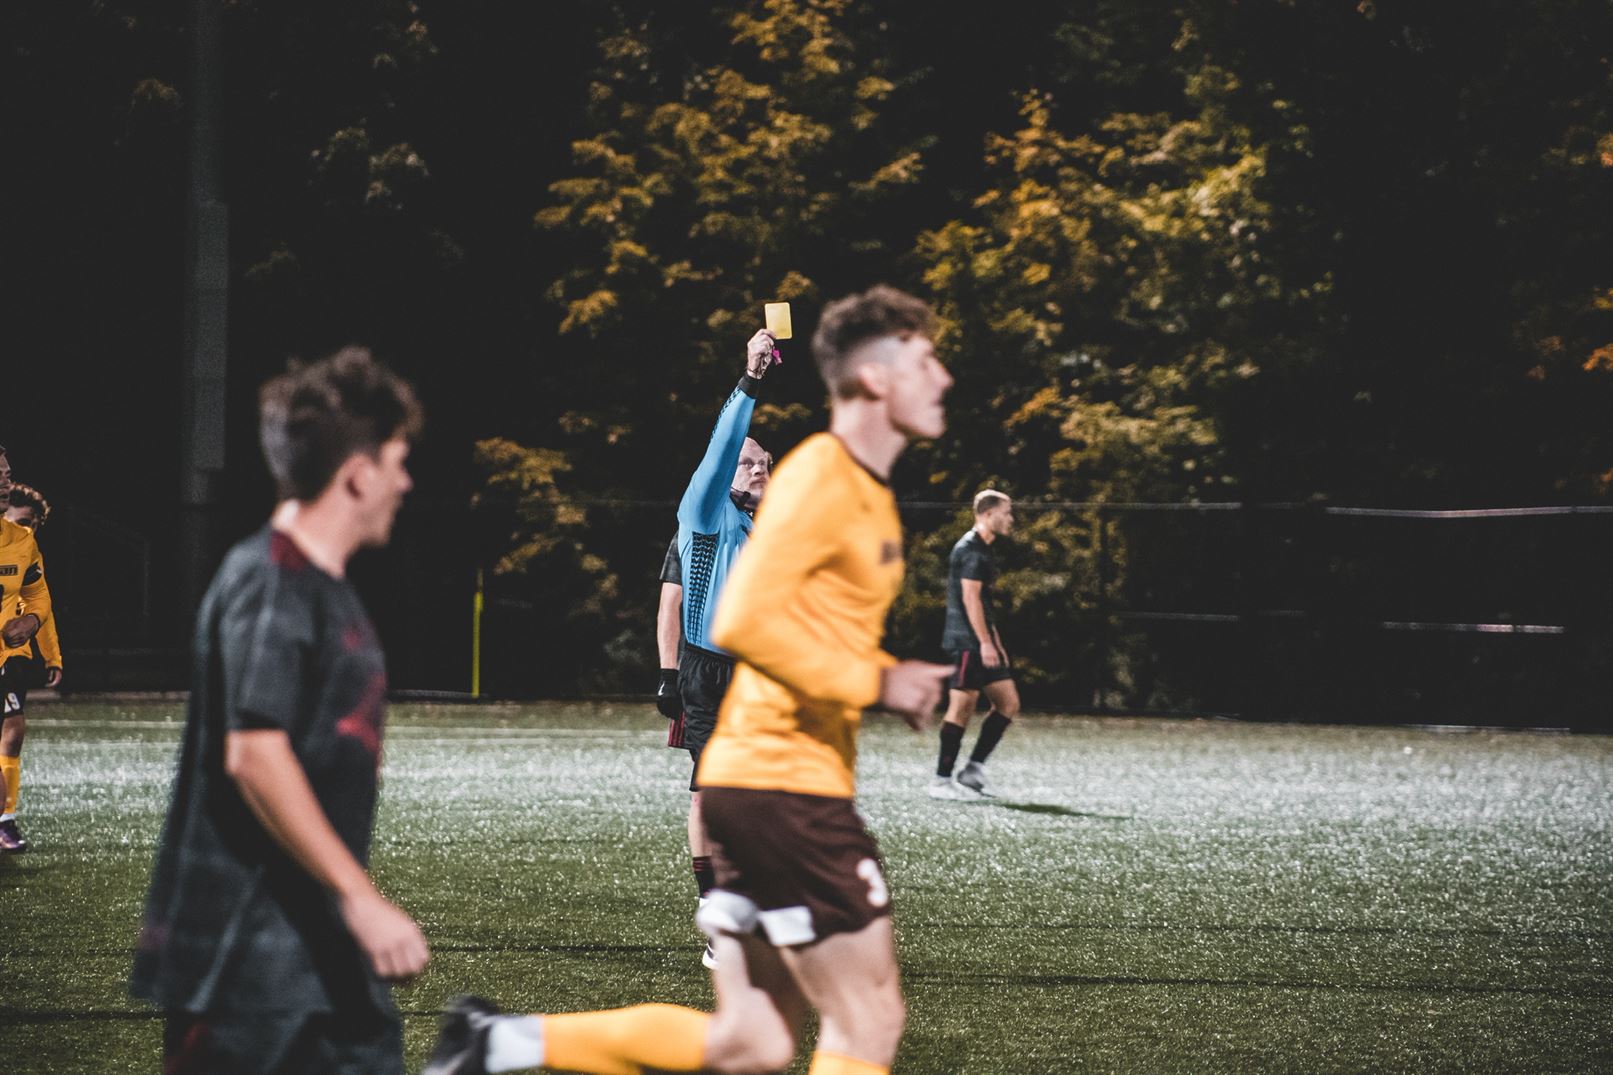 Seven yellow cards were given out in yet another chippy conference matchup. Dan Dreisbach | The Montclarion